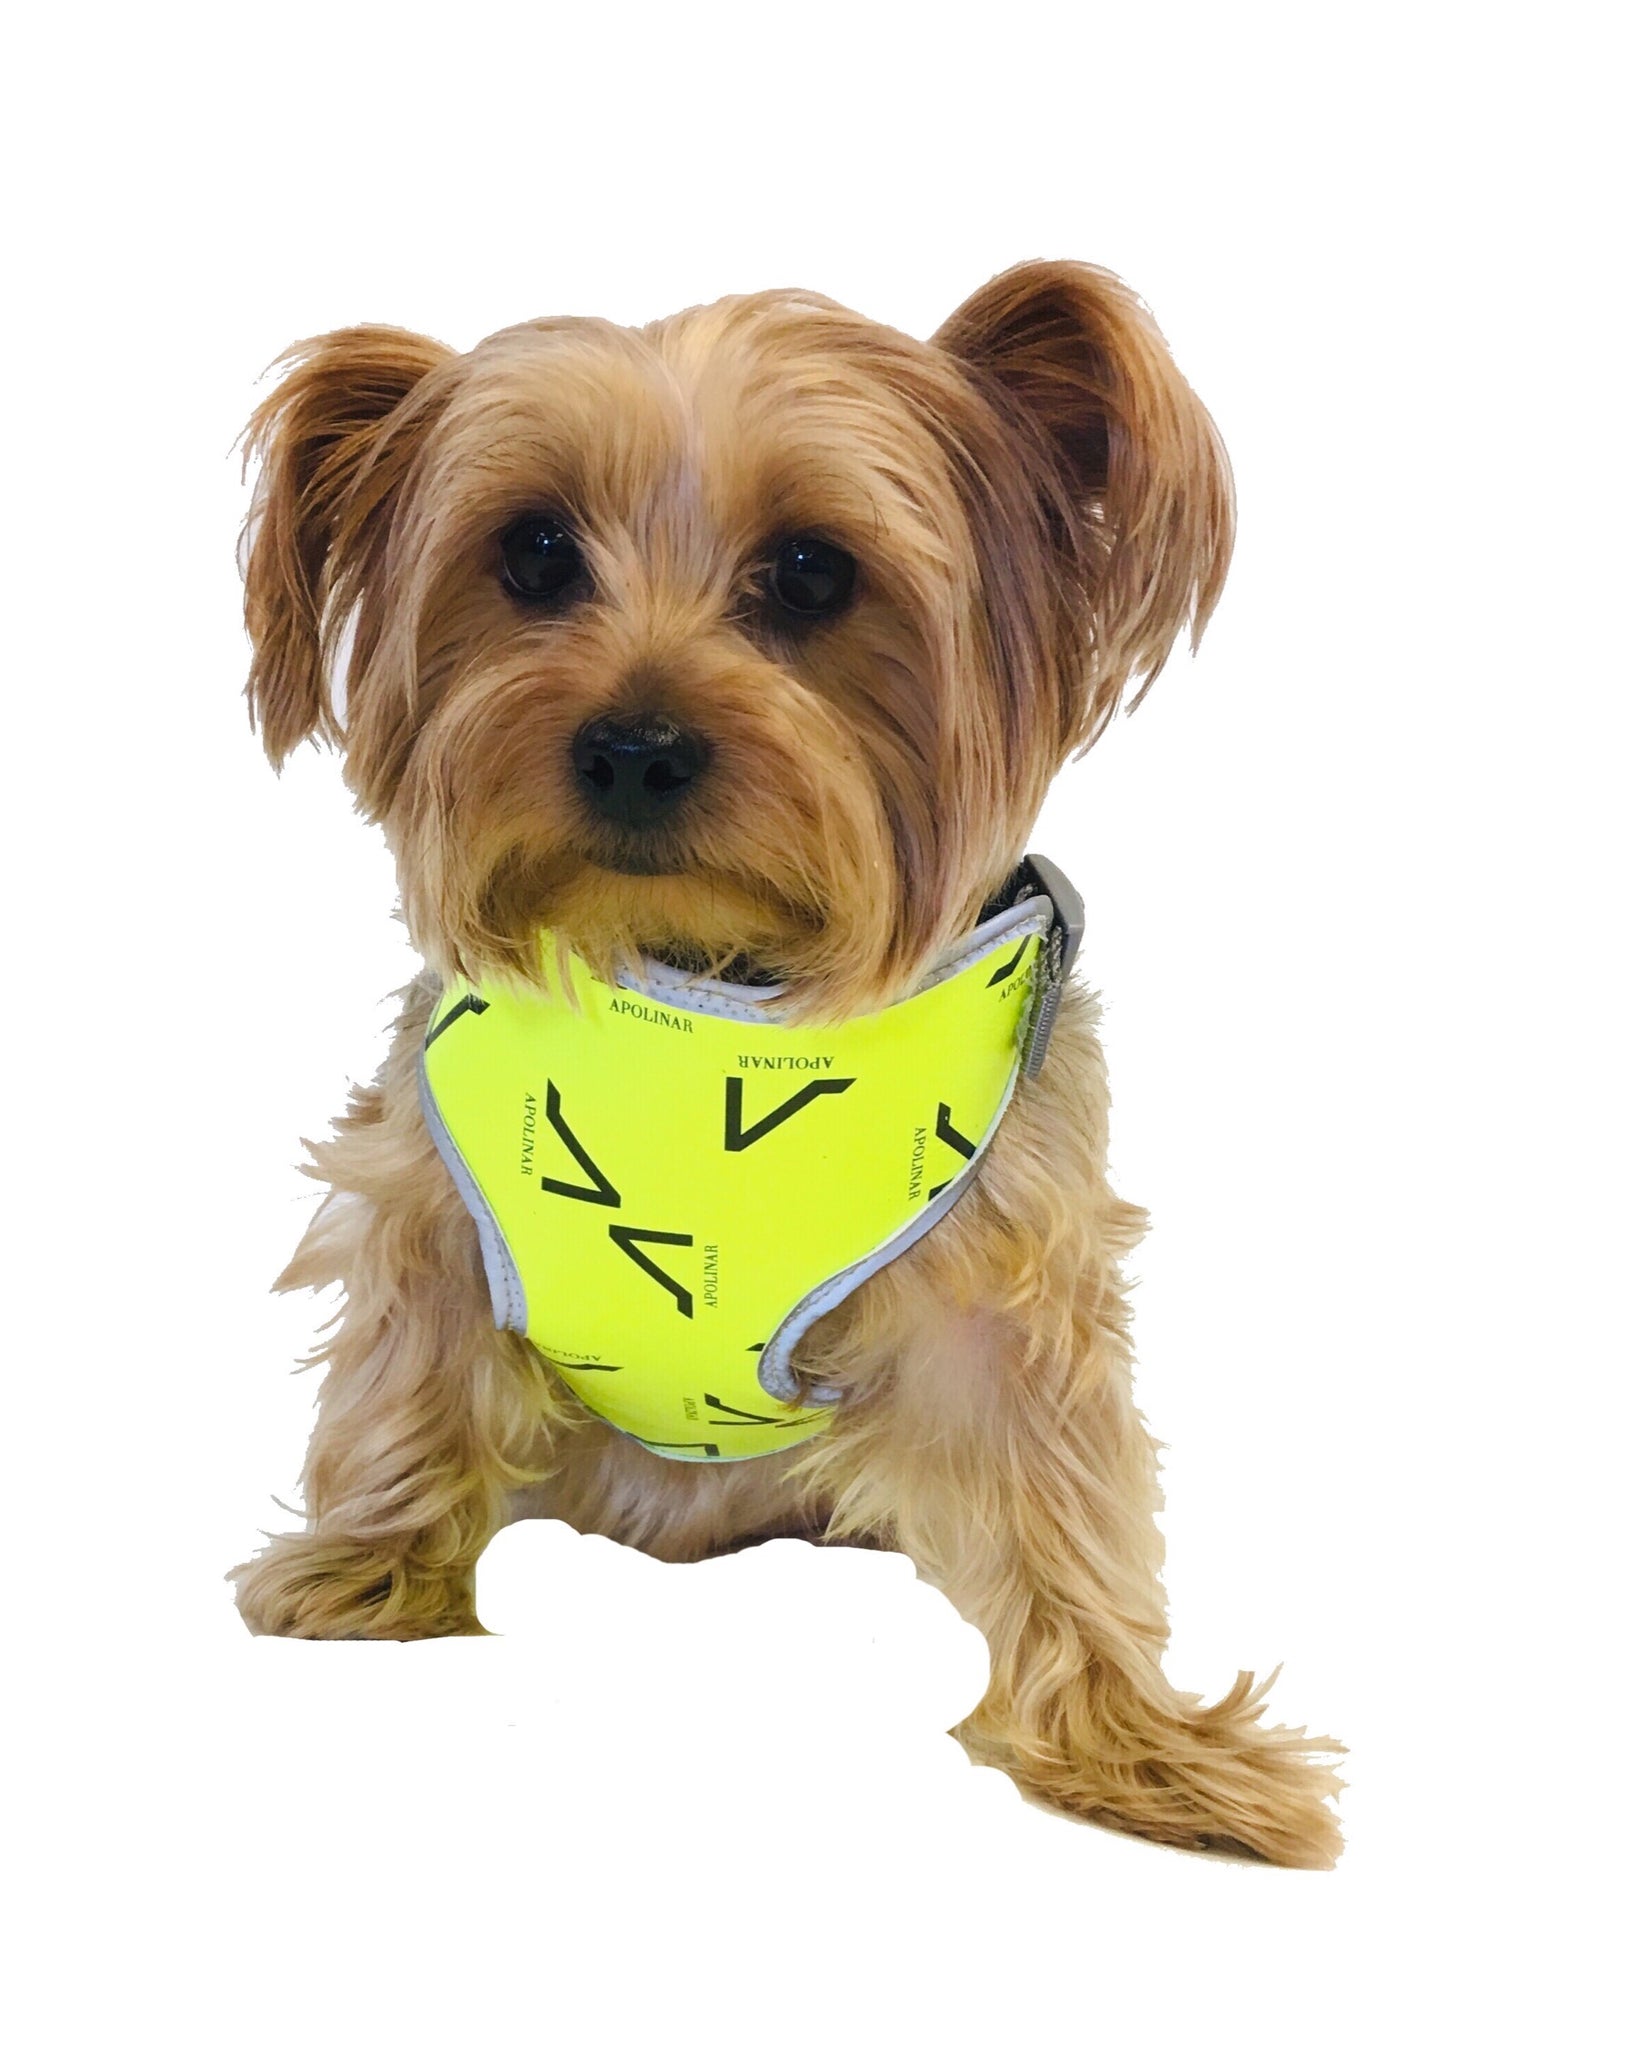 Ranilopa Canine Harness (4 colors available)